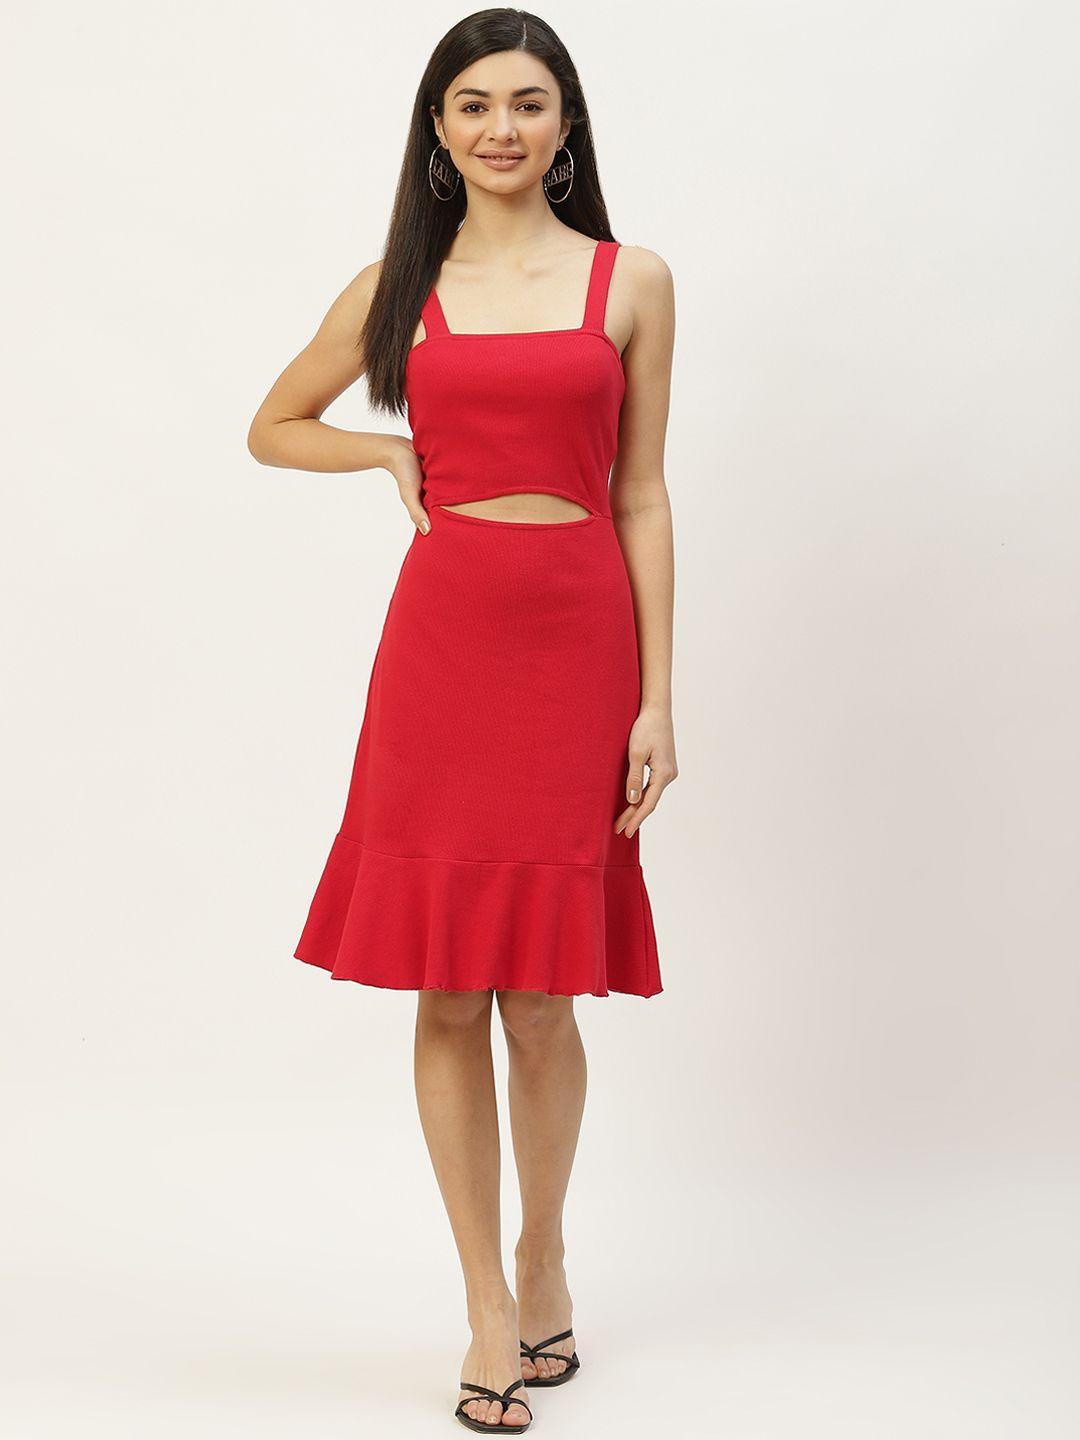 off label red ribbed a-line dress with cut out detail